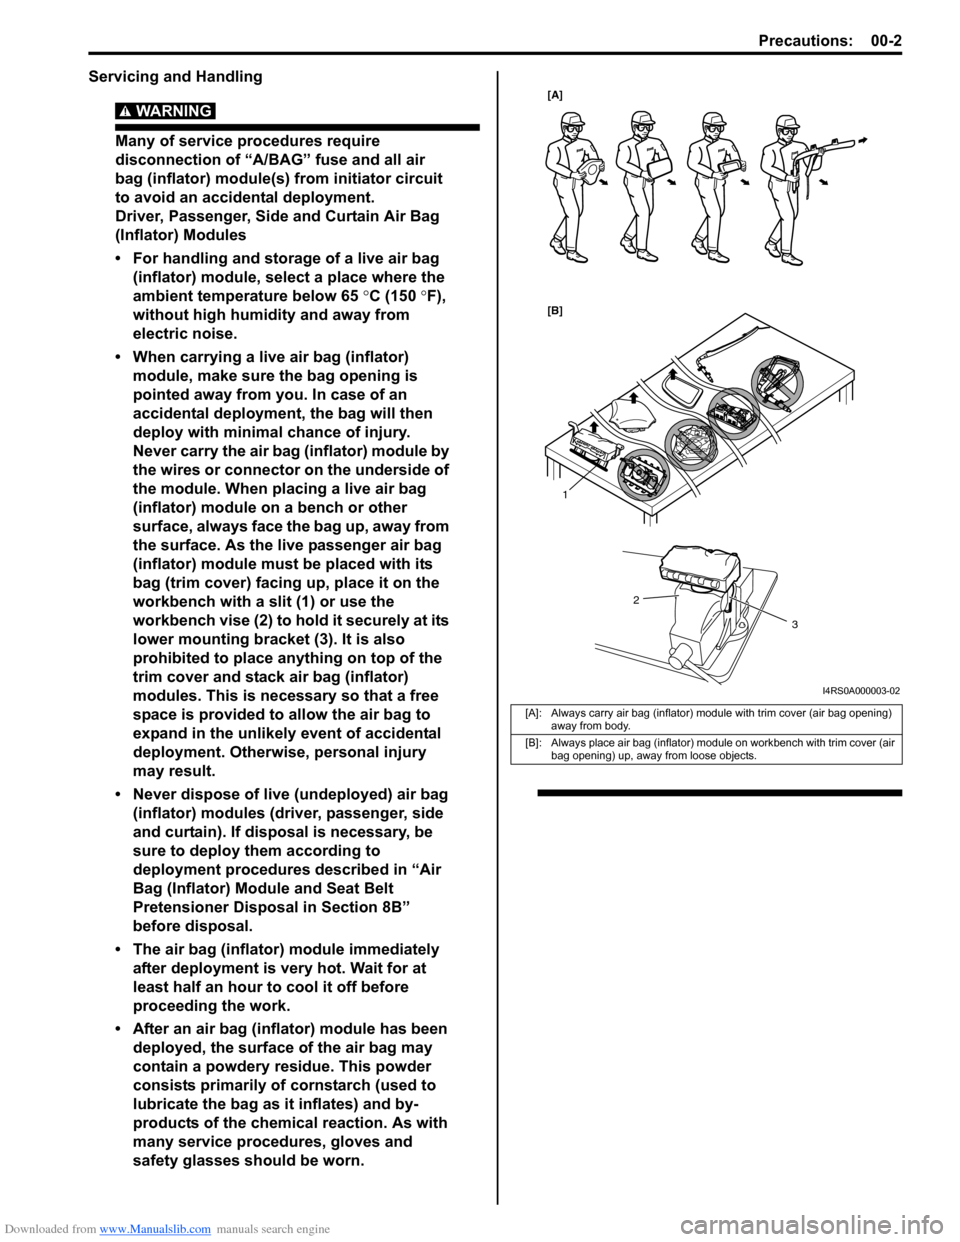 SUZUKI SWIFT 2006 2.G Service Workshop Manual Downloaded from www.Manualslib.com manuals search engine Precautions: 00-2
Servicing and Handling
WARNING! 
Many of service procedures require 
disconnection of “A/BAG” fuse and all air 
bag (infl